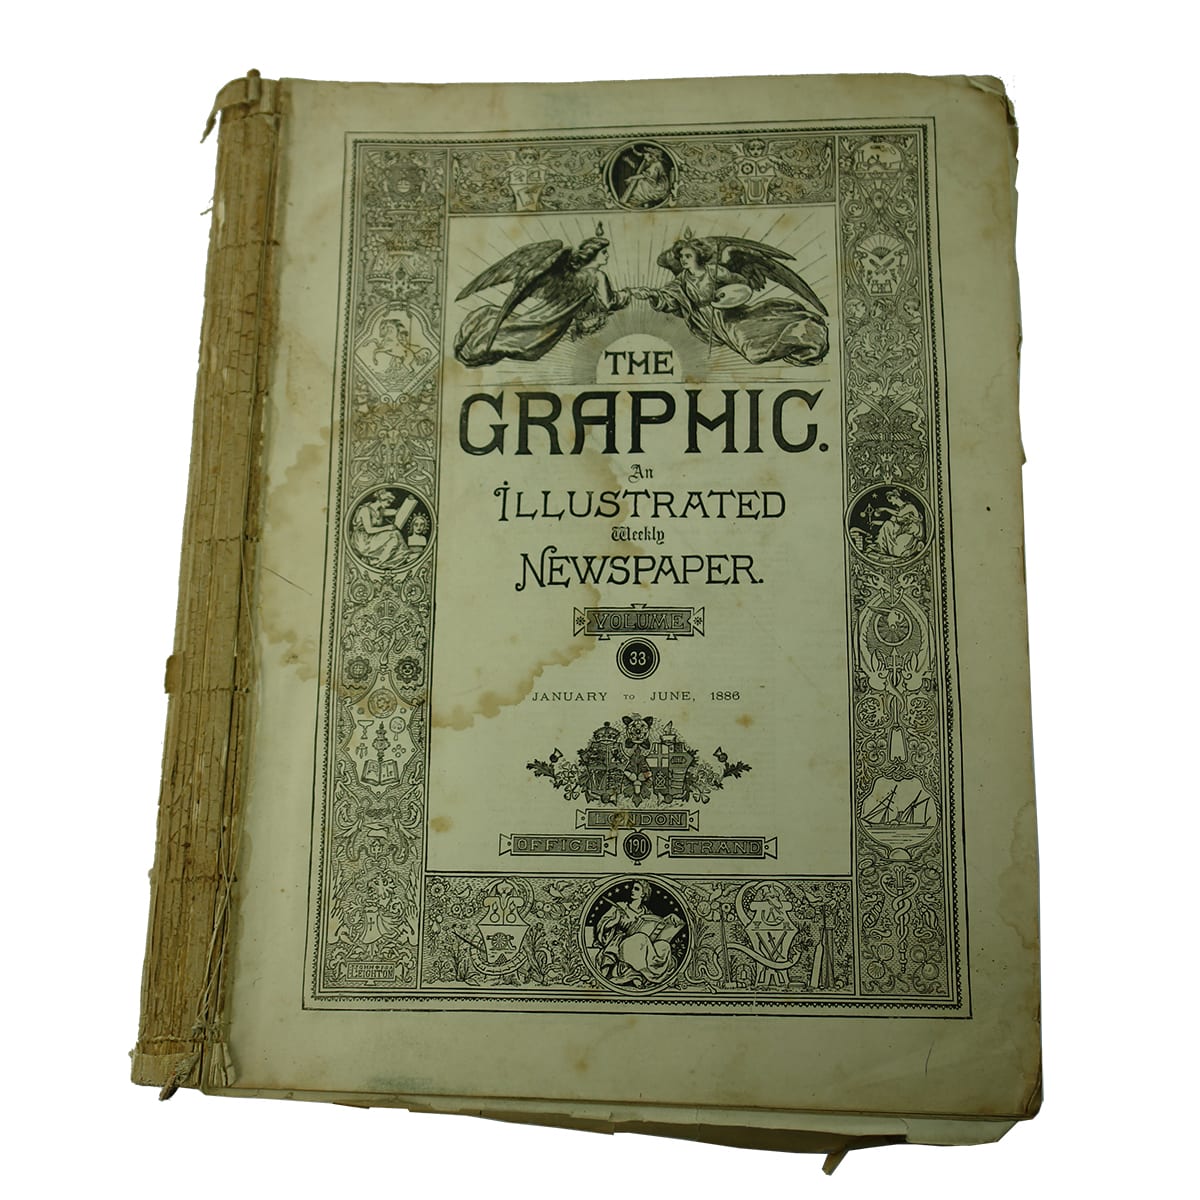 Bound volume of The Graphic. 1886.